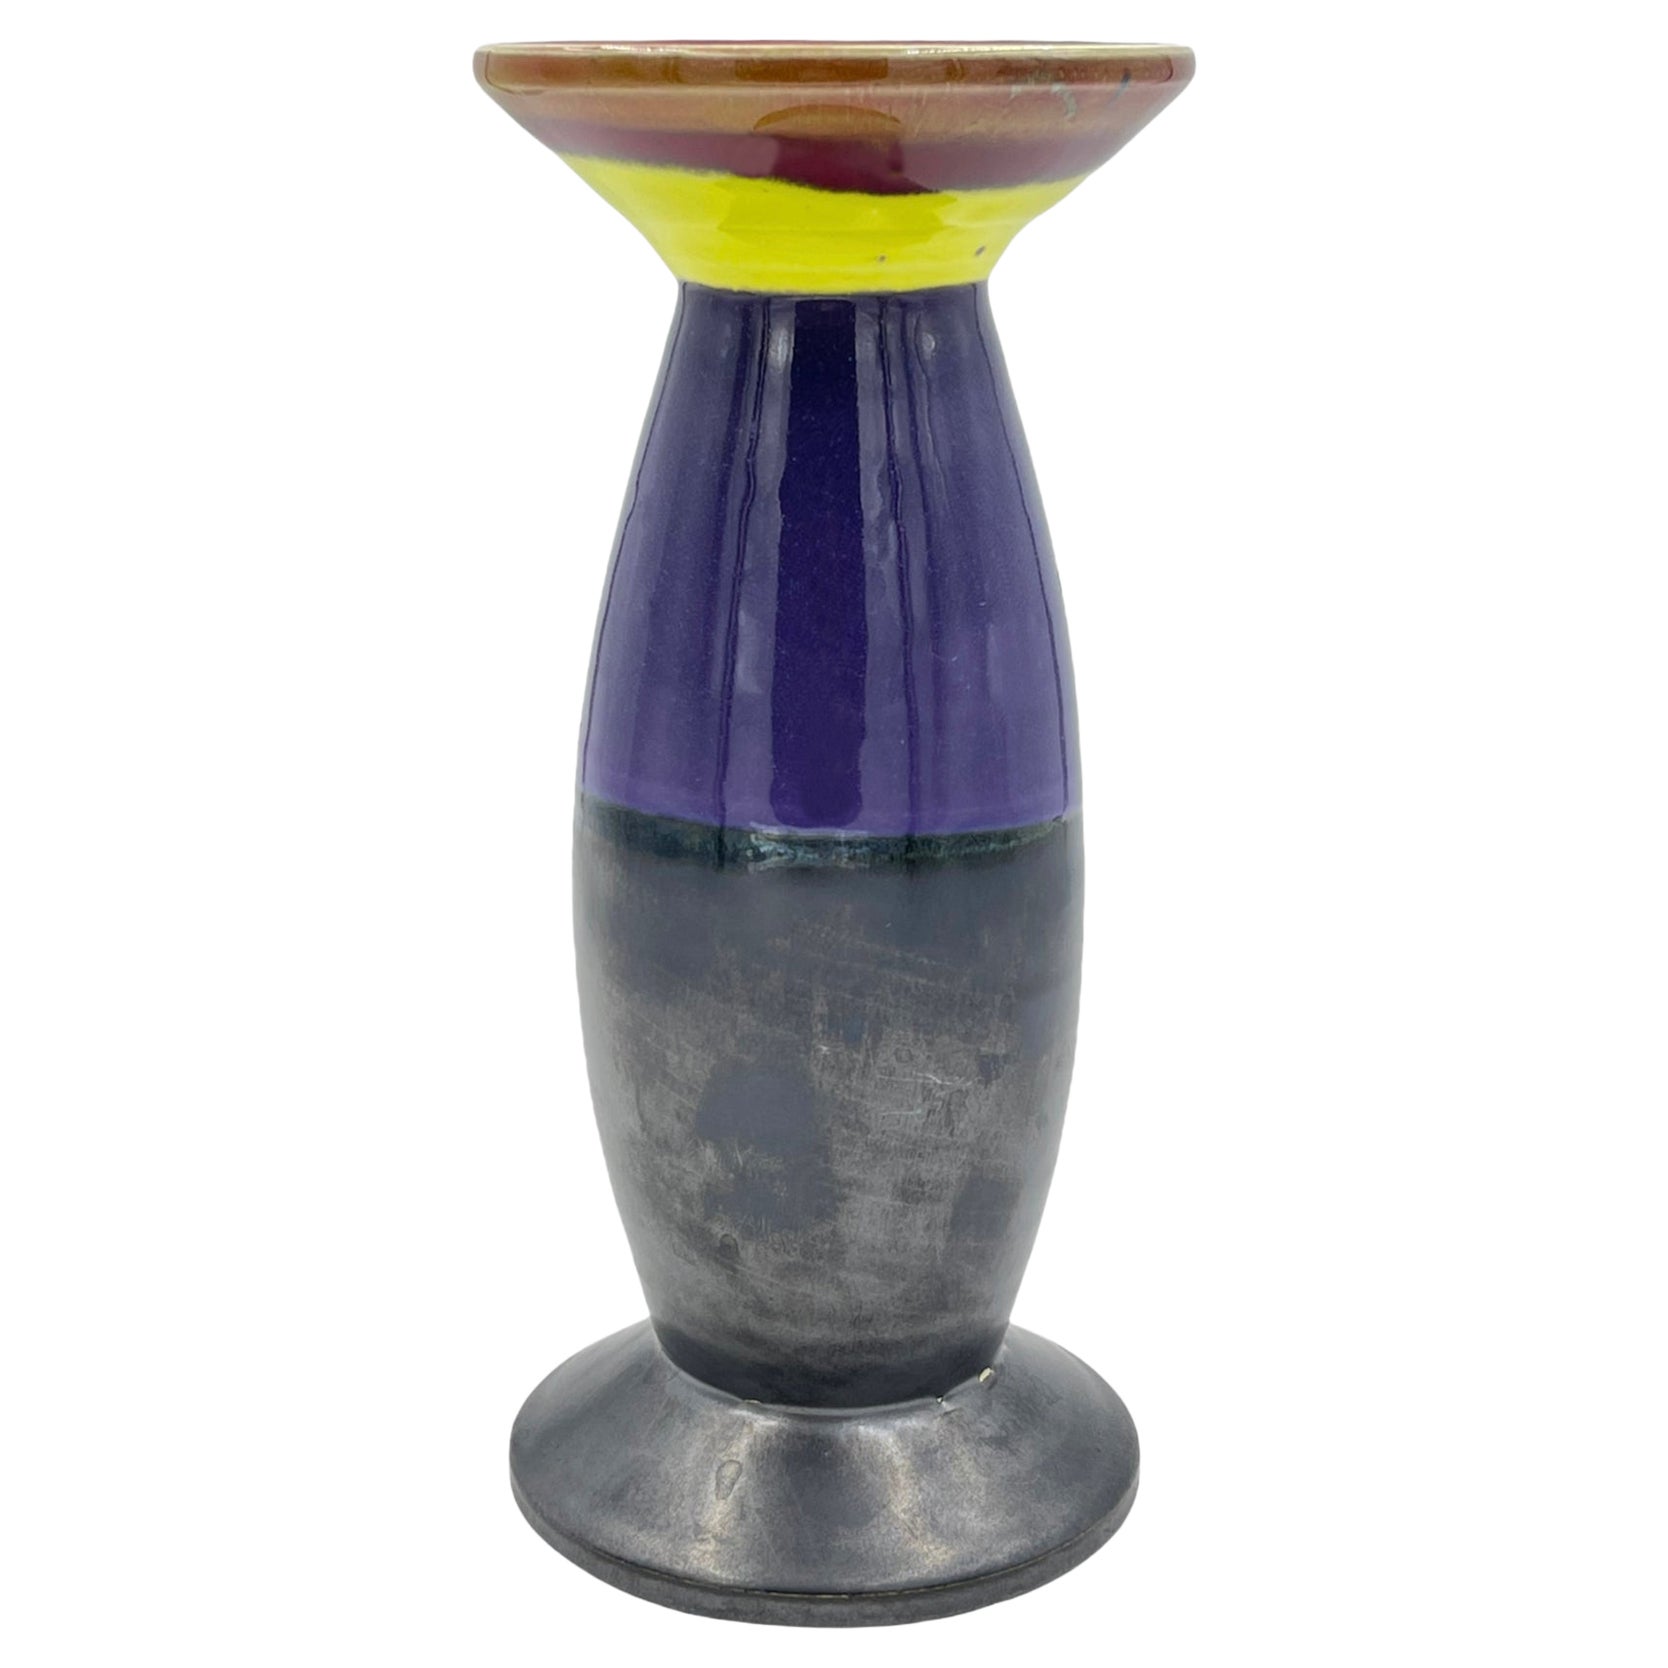 Peter Shire Tall Expo Vase, 2000 For Sale